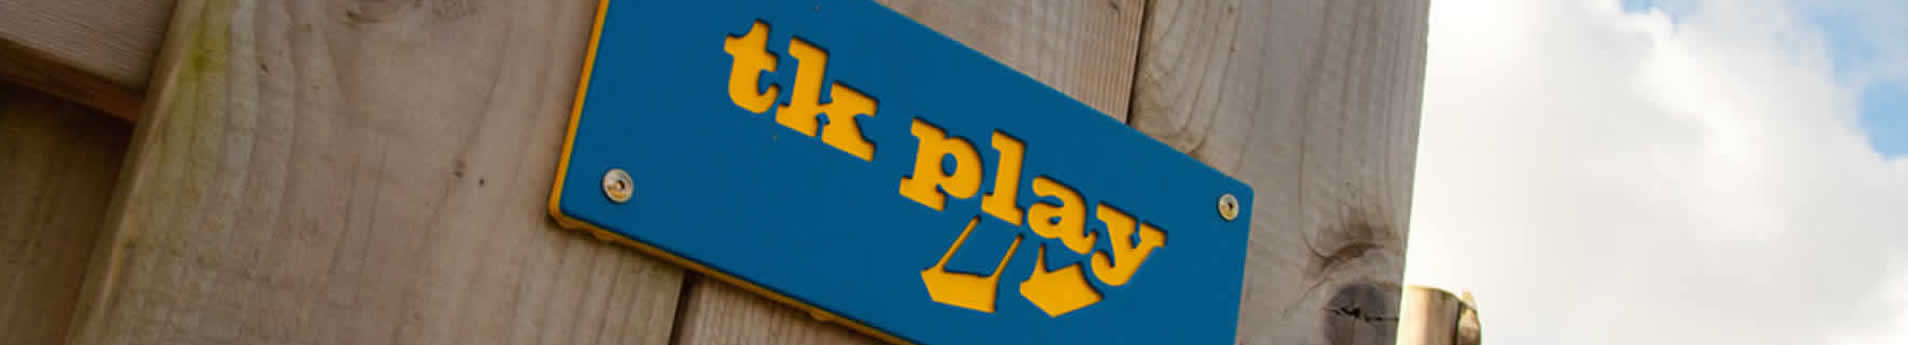 TK Play and why we’re recommended by so many for playground services in the UK